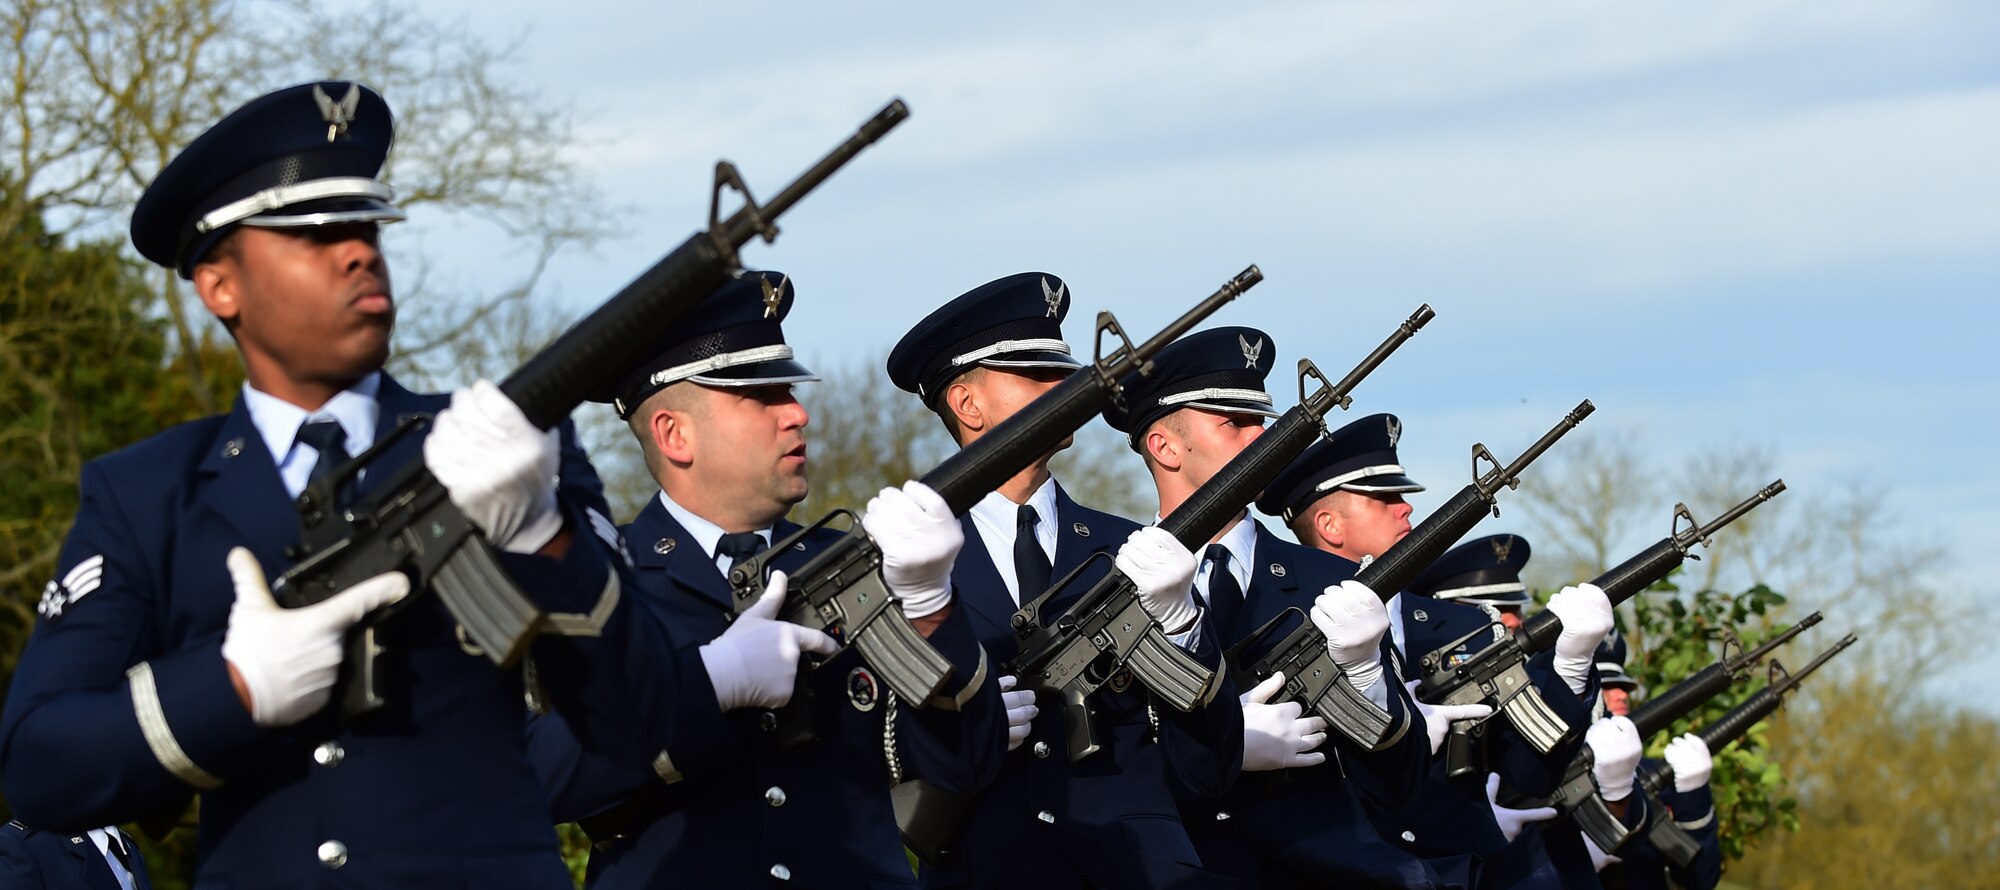 Members of the 423rd Air Base Group honor guard perform a volley during a Veterans Day ceremony at Cambridge American Cemetery, United Kingdom, Nov. 11, 2015. The Honor Guard paid tribute to Service members both past and present with a volley and the playing of Taps. (U.S. Air Force photo by Master Sgt. Chrissy Best/Released)